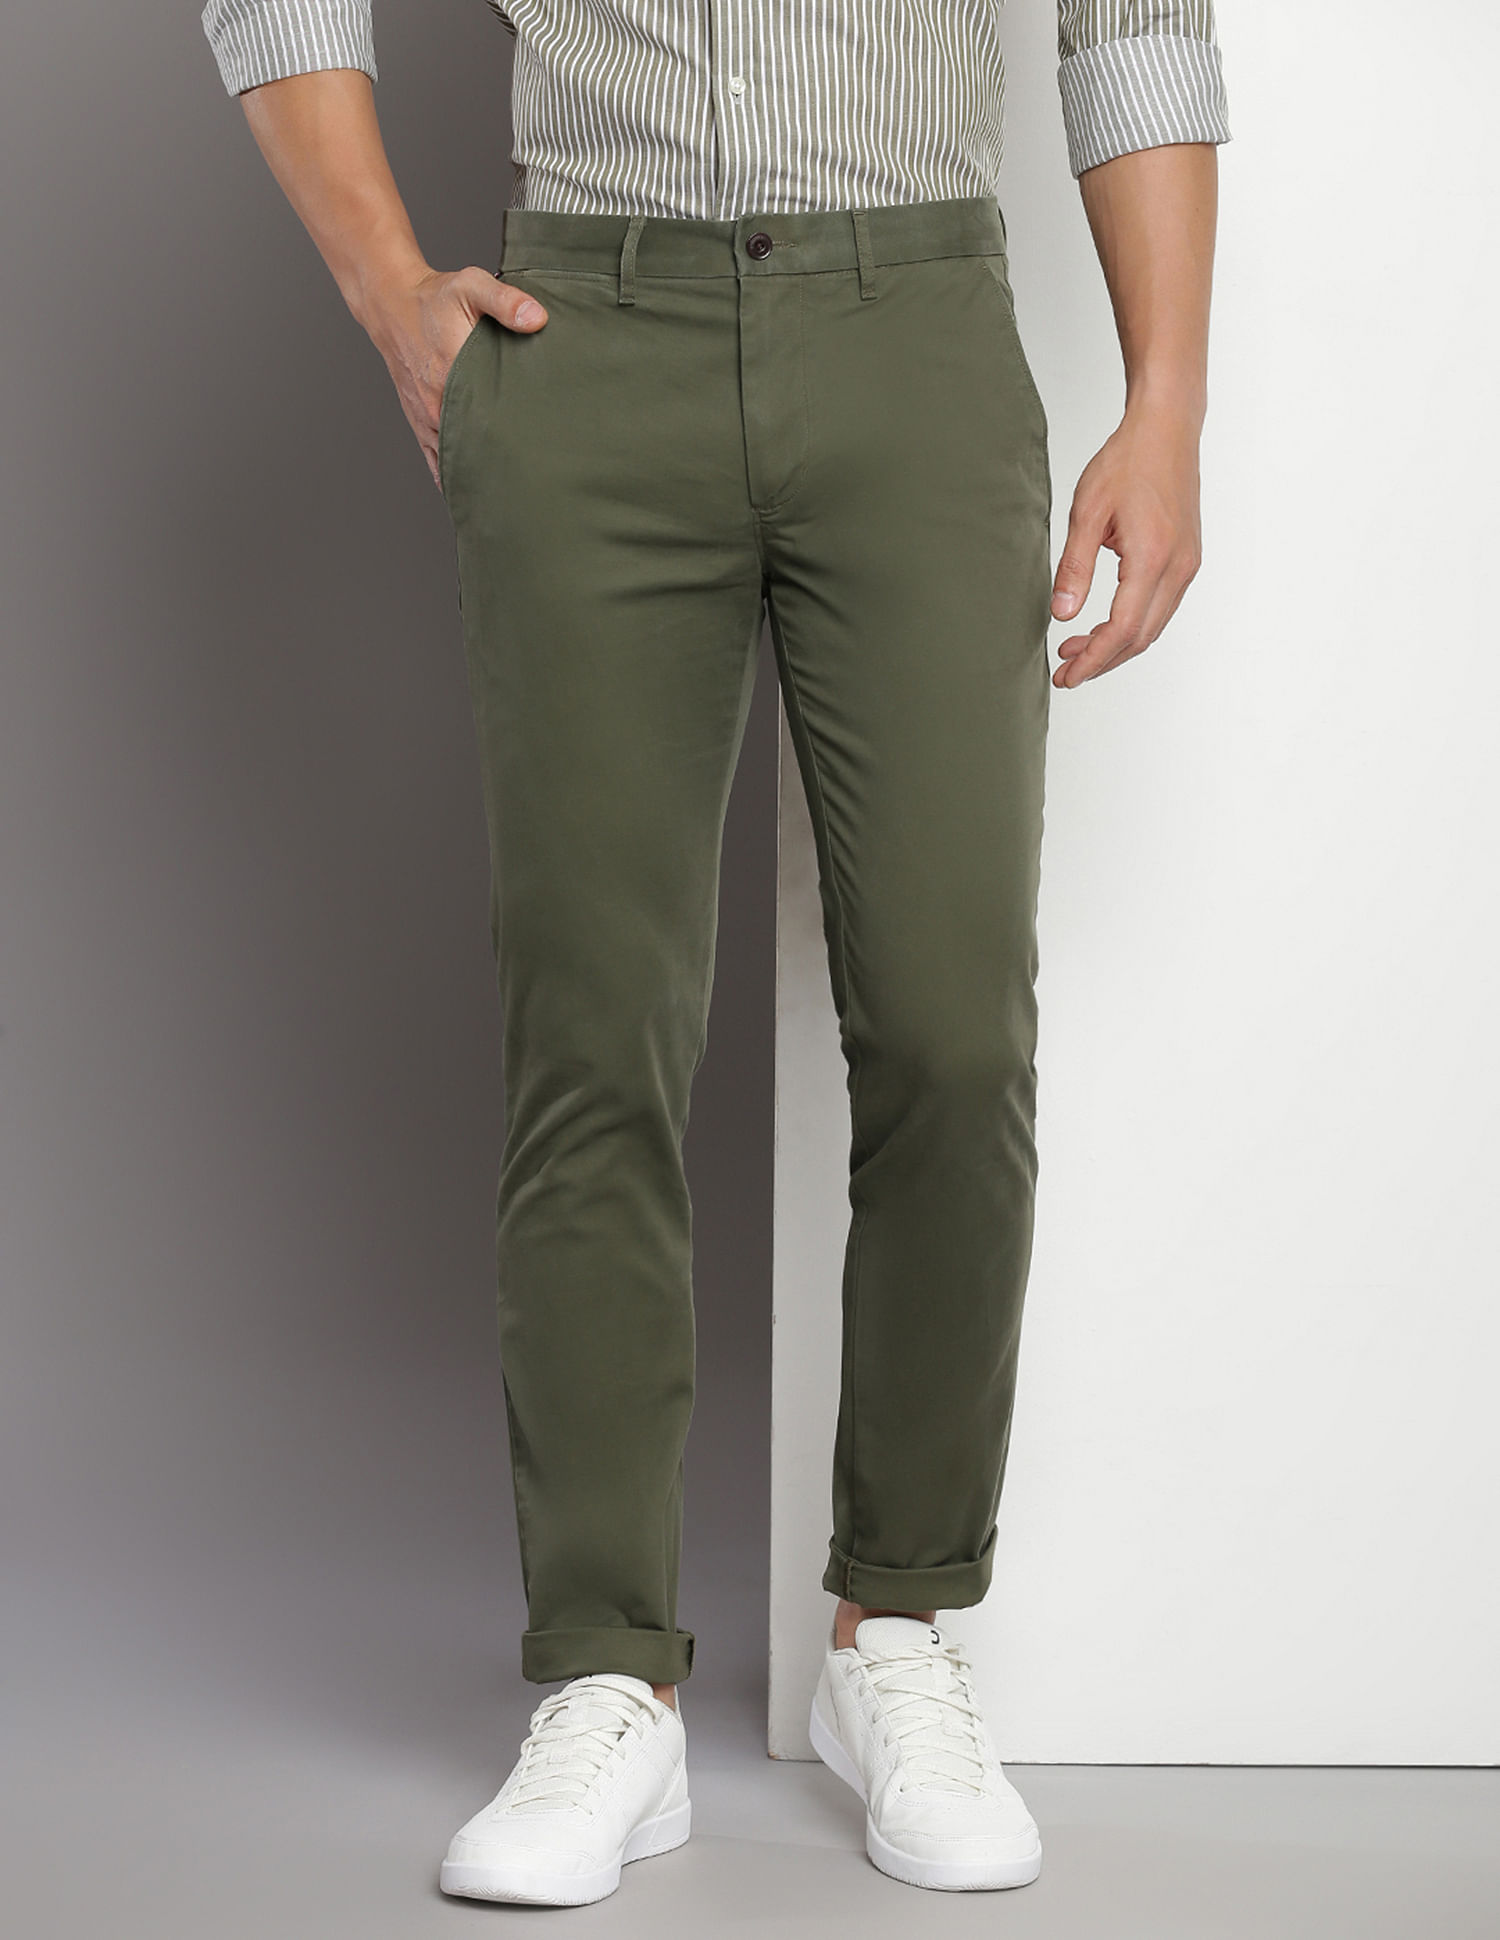 Buy Tommy Hilfiger Mid Rise Slim Fit Trousers - NNNOW.com